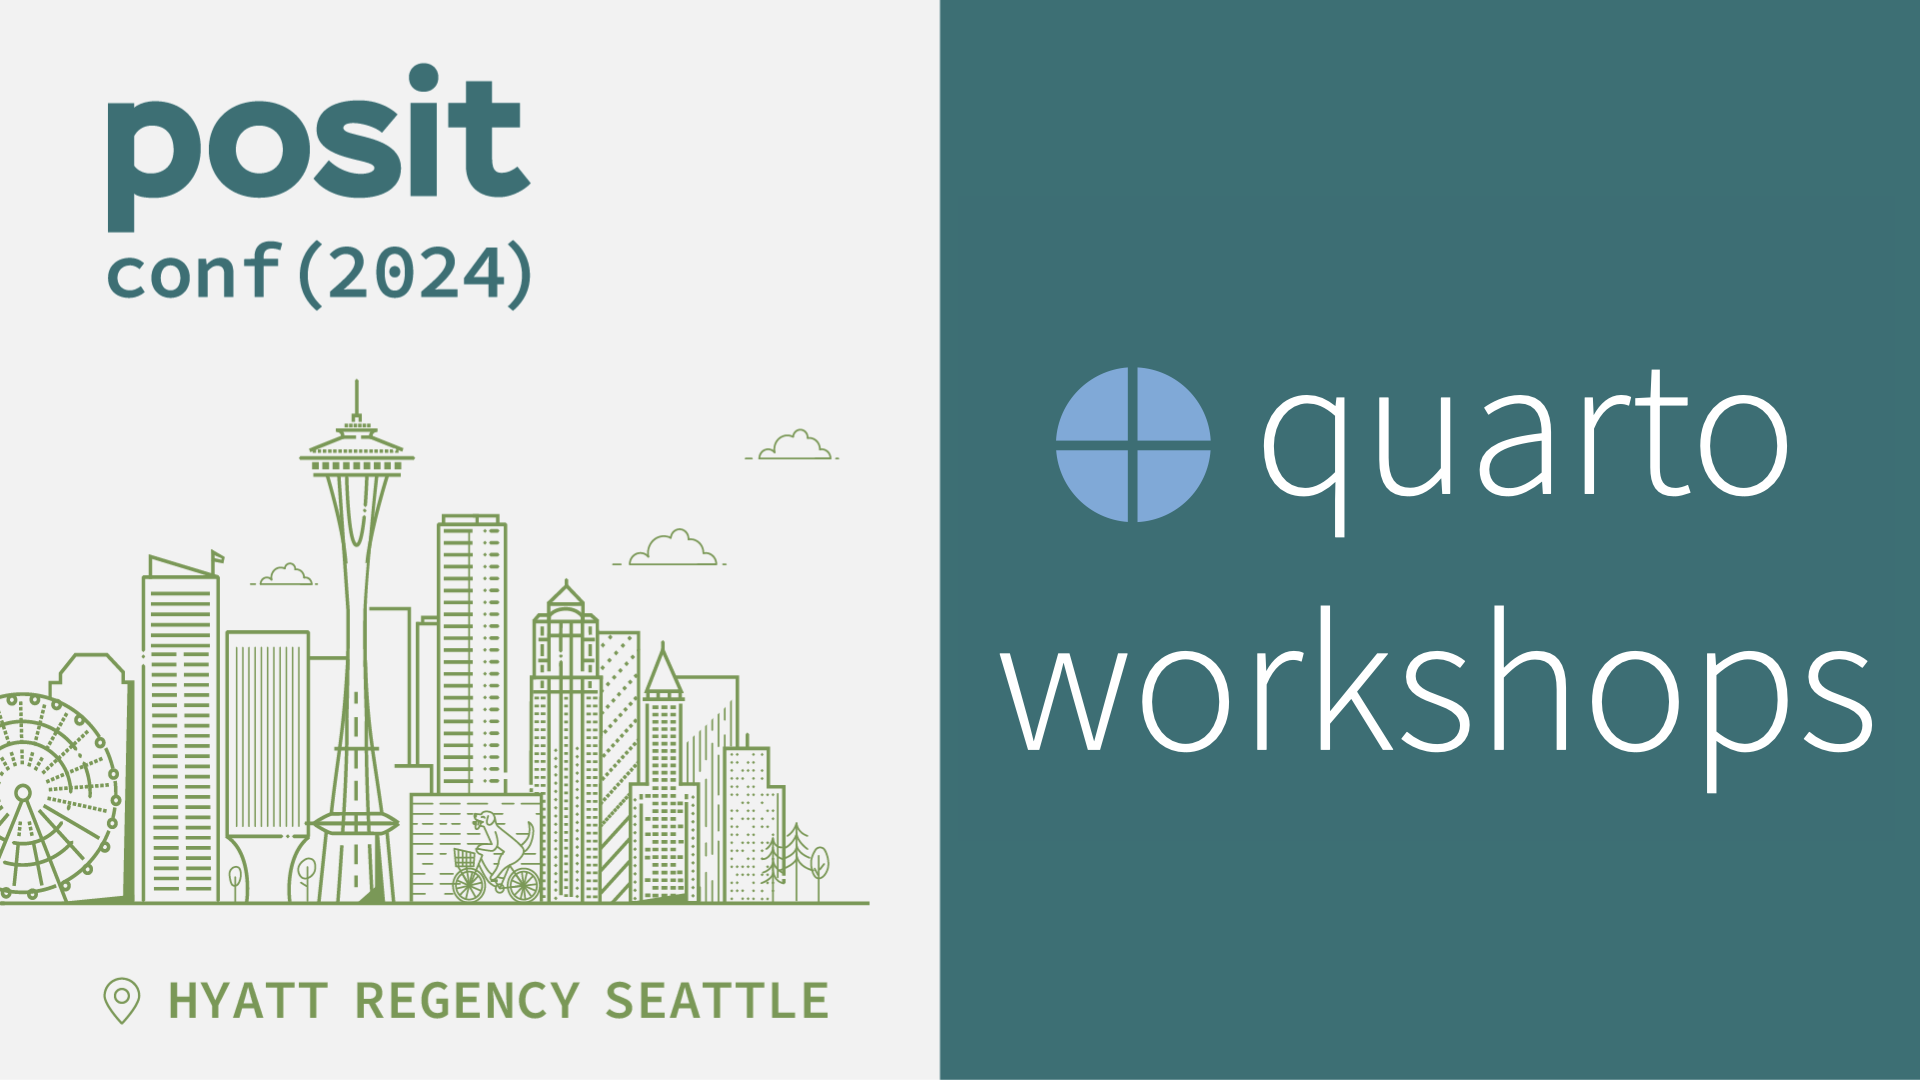 posit::conf(2024) iconography including Seattle skyline on the left and the words &#039;Quarto workshops' on the right.